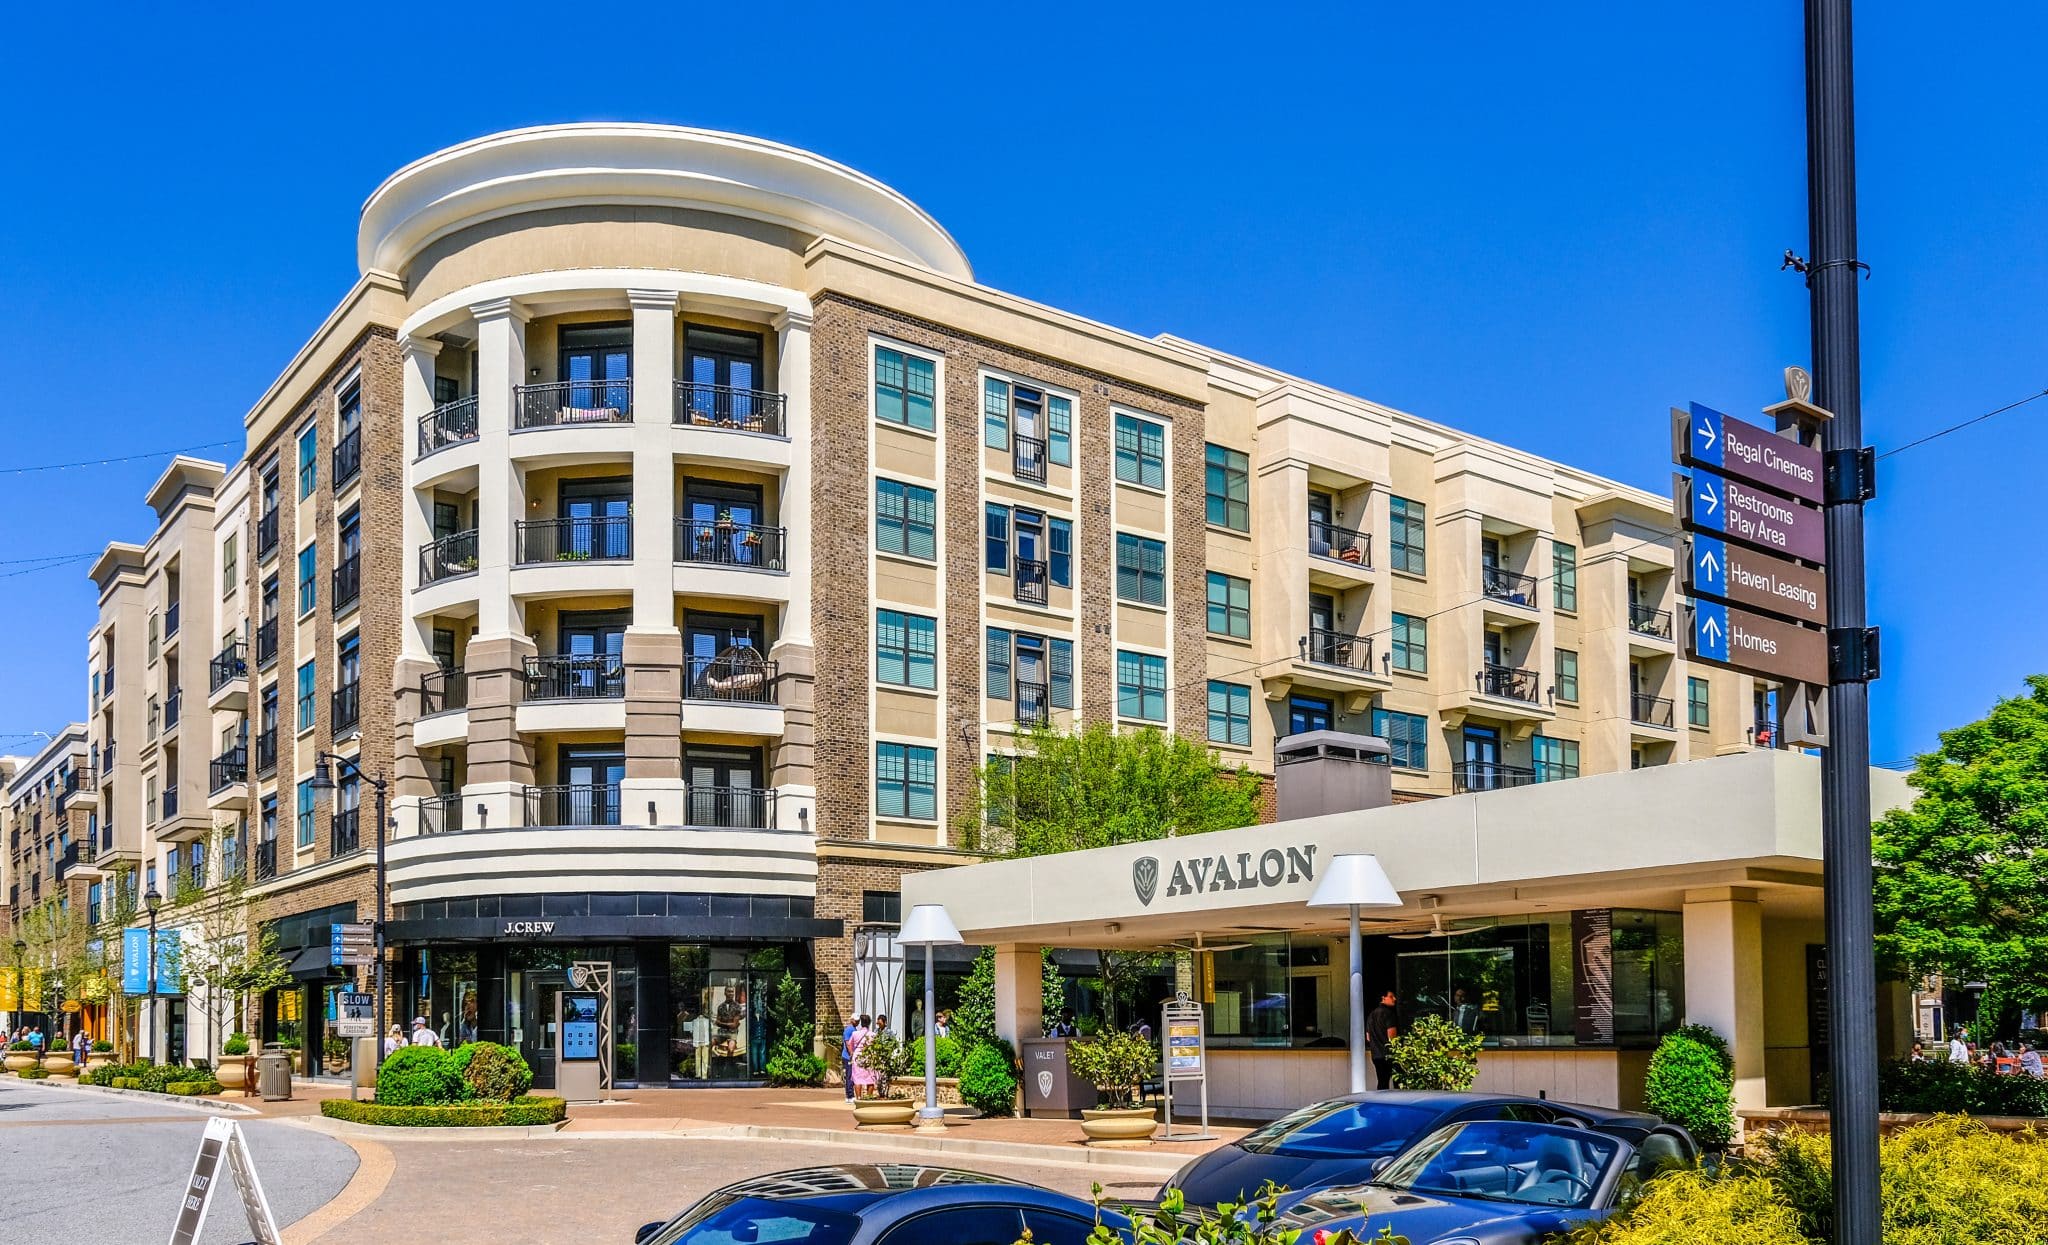 Alpharetta is one of the top cities in the U.S. for finding a new apartment